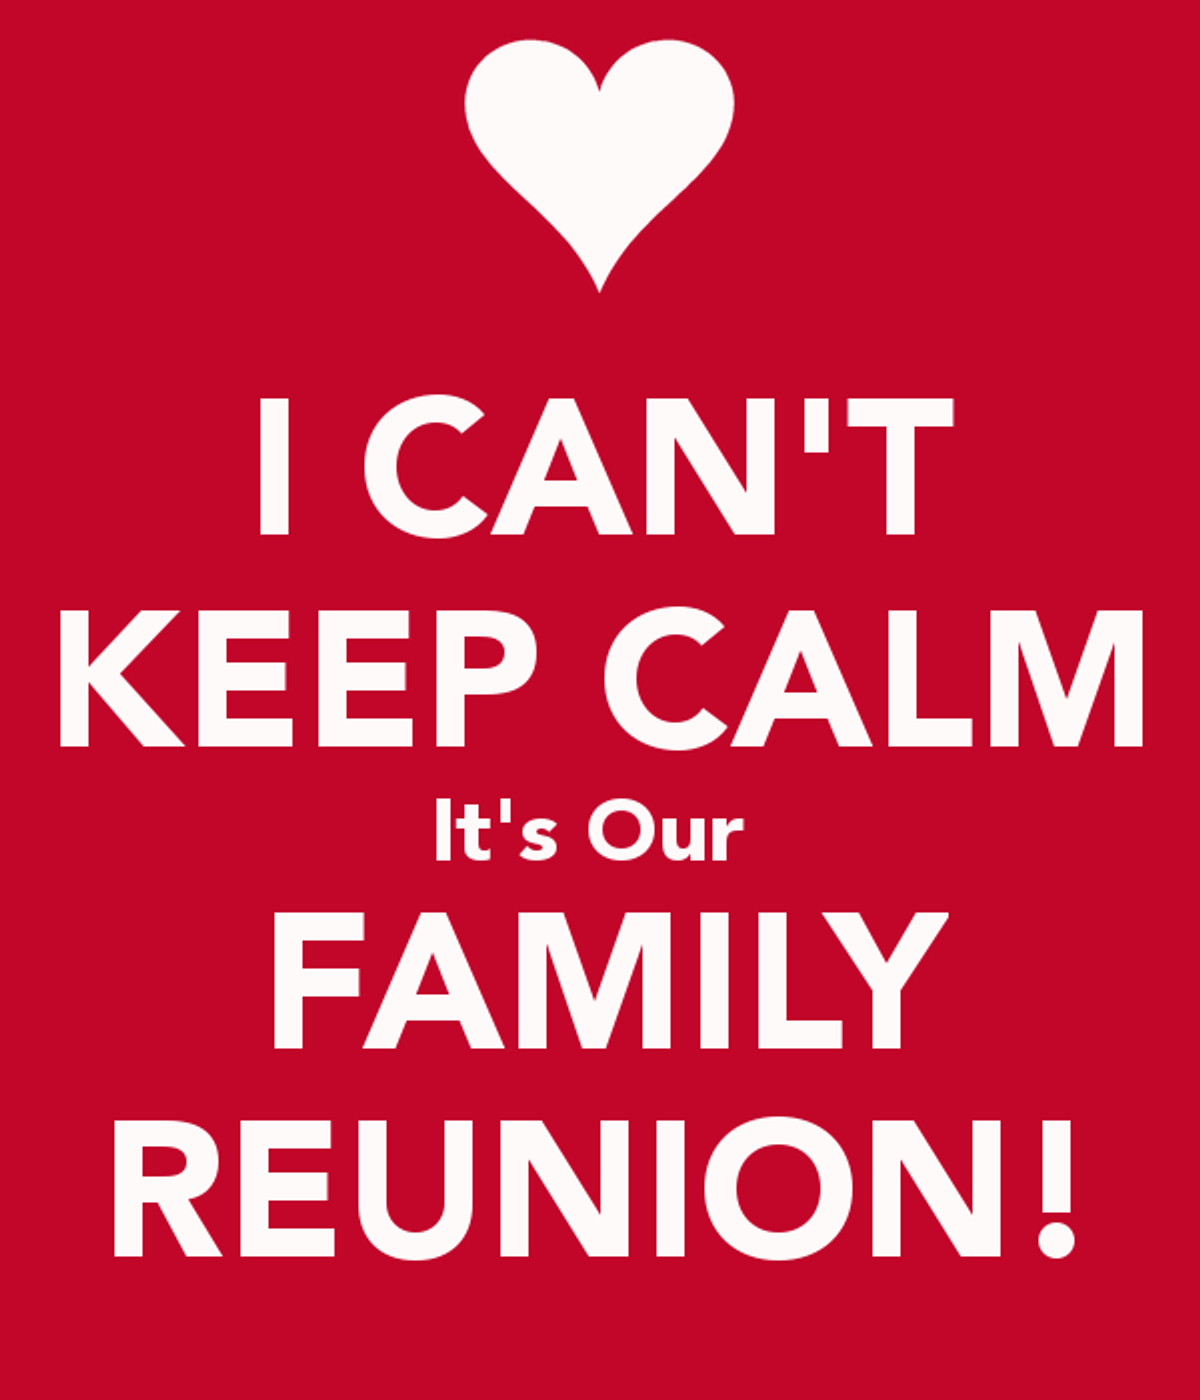 What A Reunion Reminded Me About Family